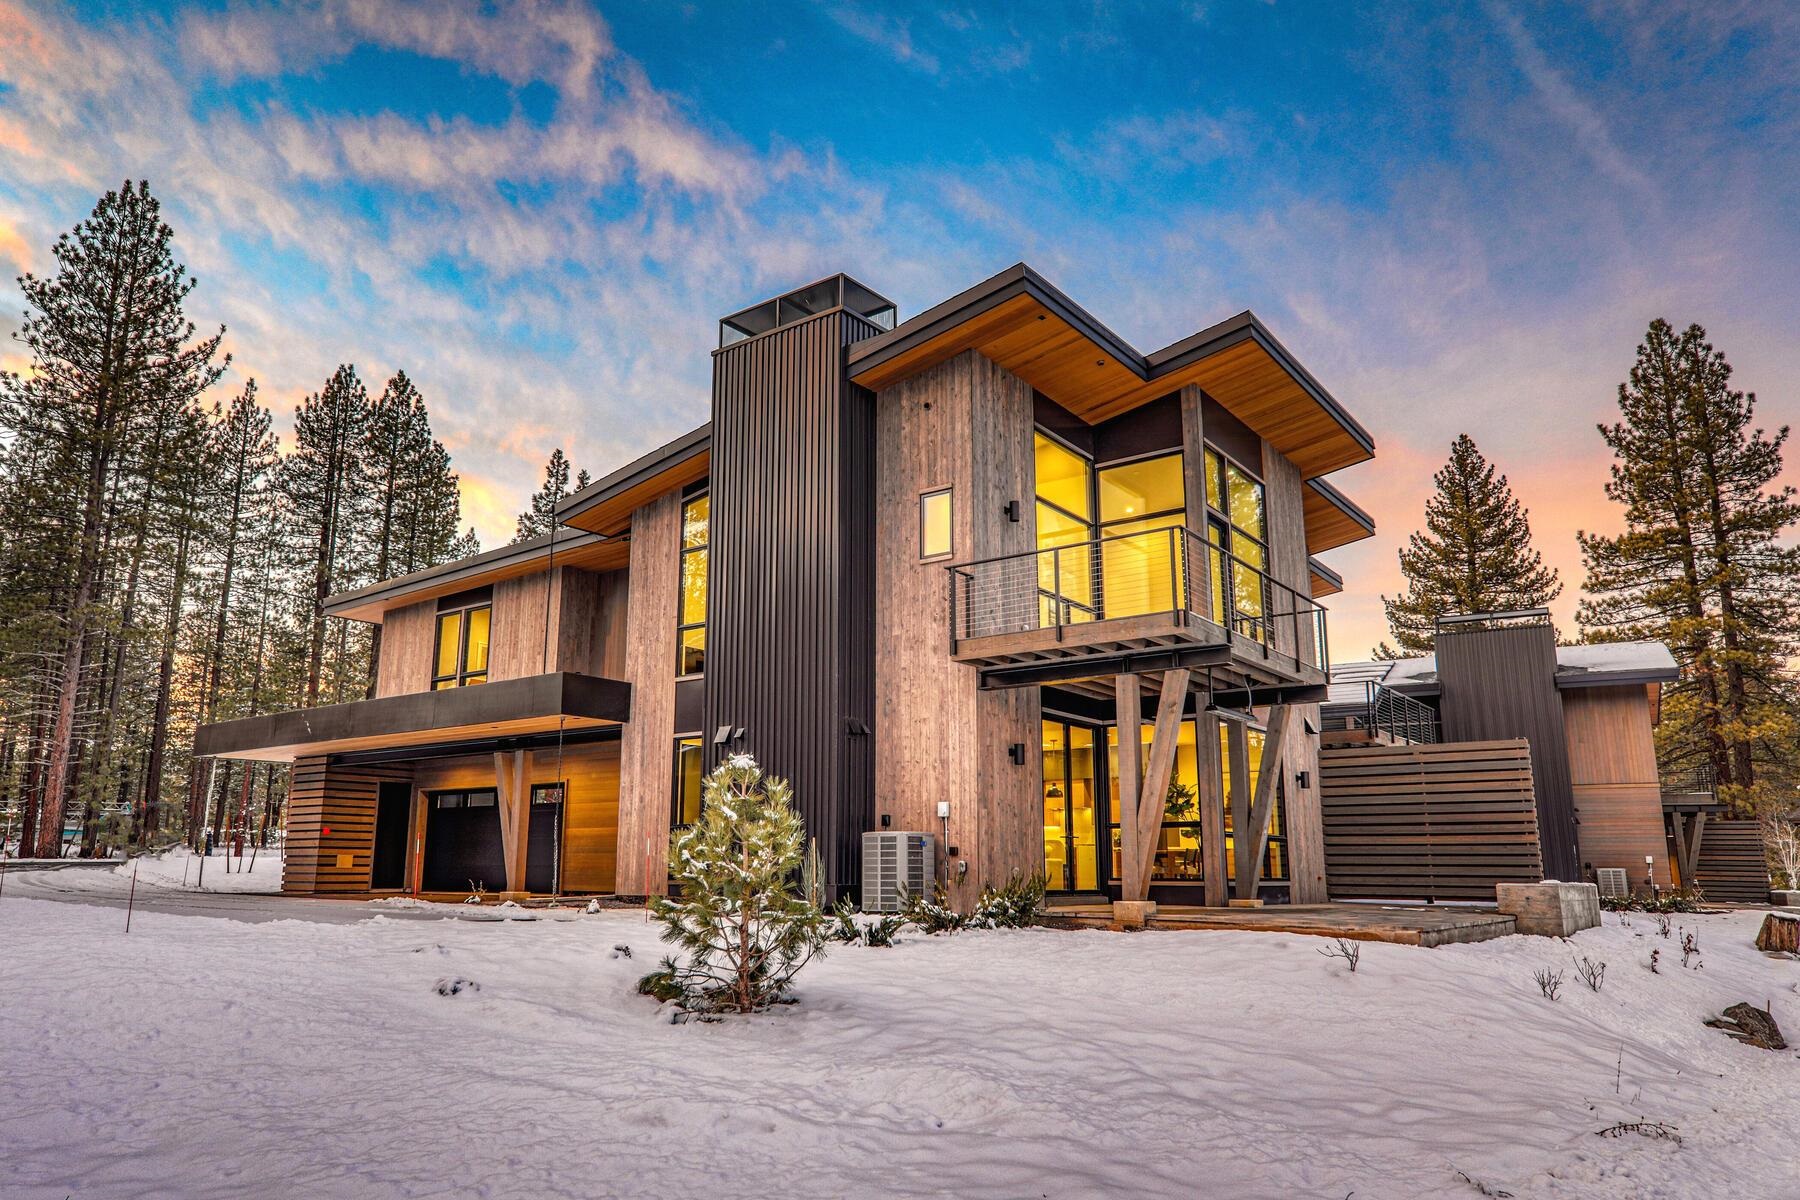 Image for 10097 Jakes Way, Truckee, CA 96161